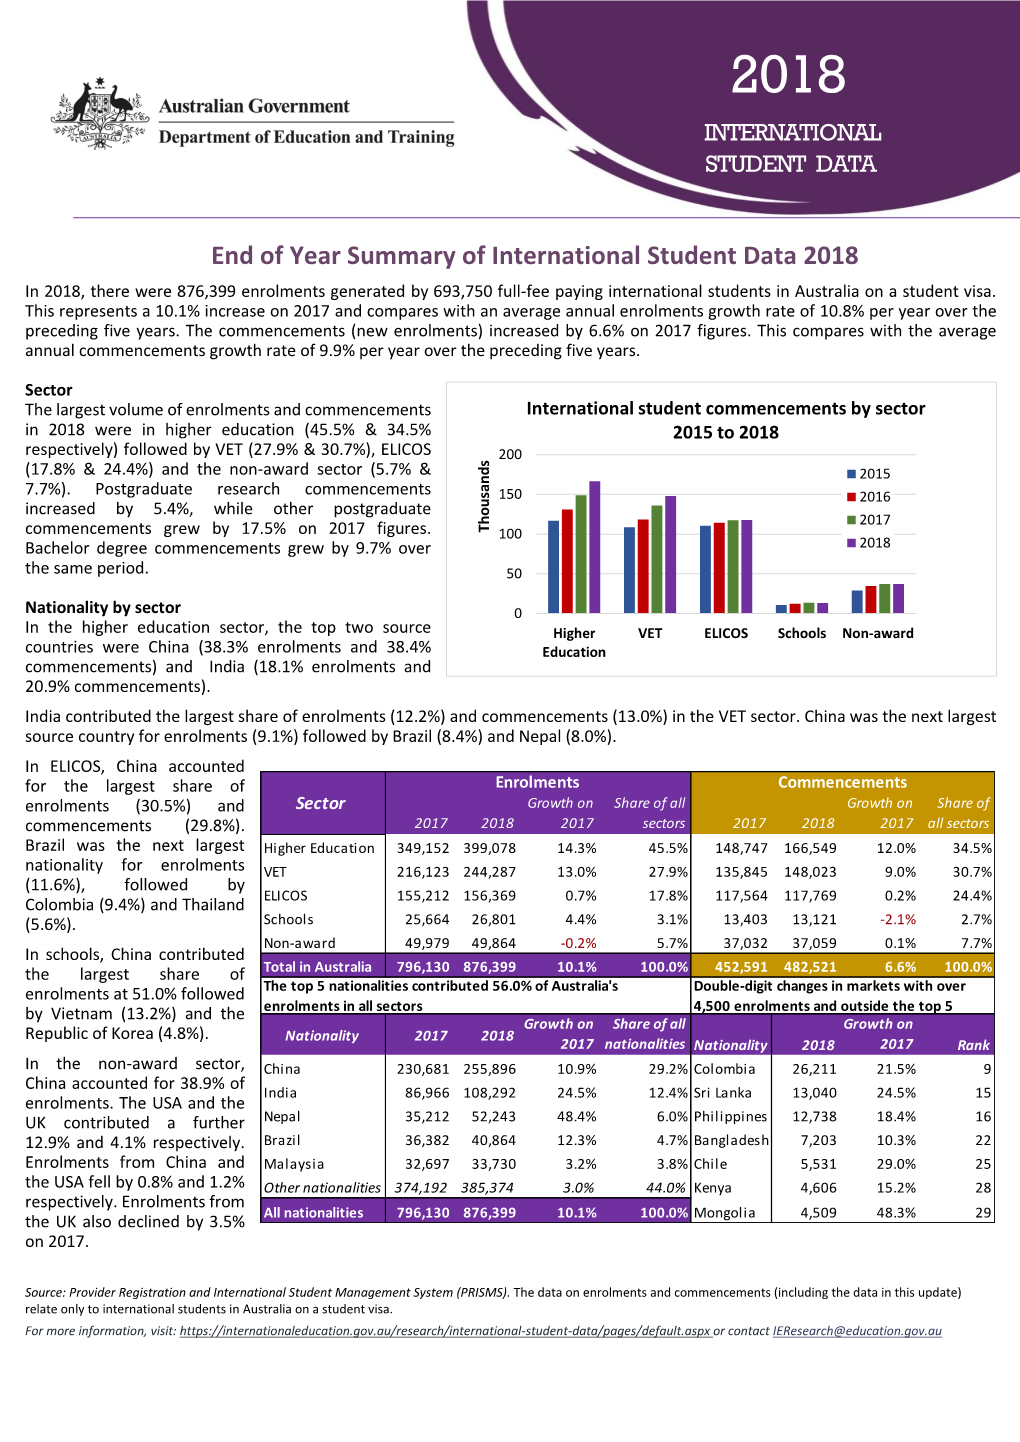 End of Year Summary of International Student Data 2018